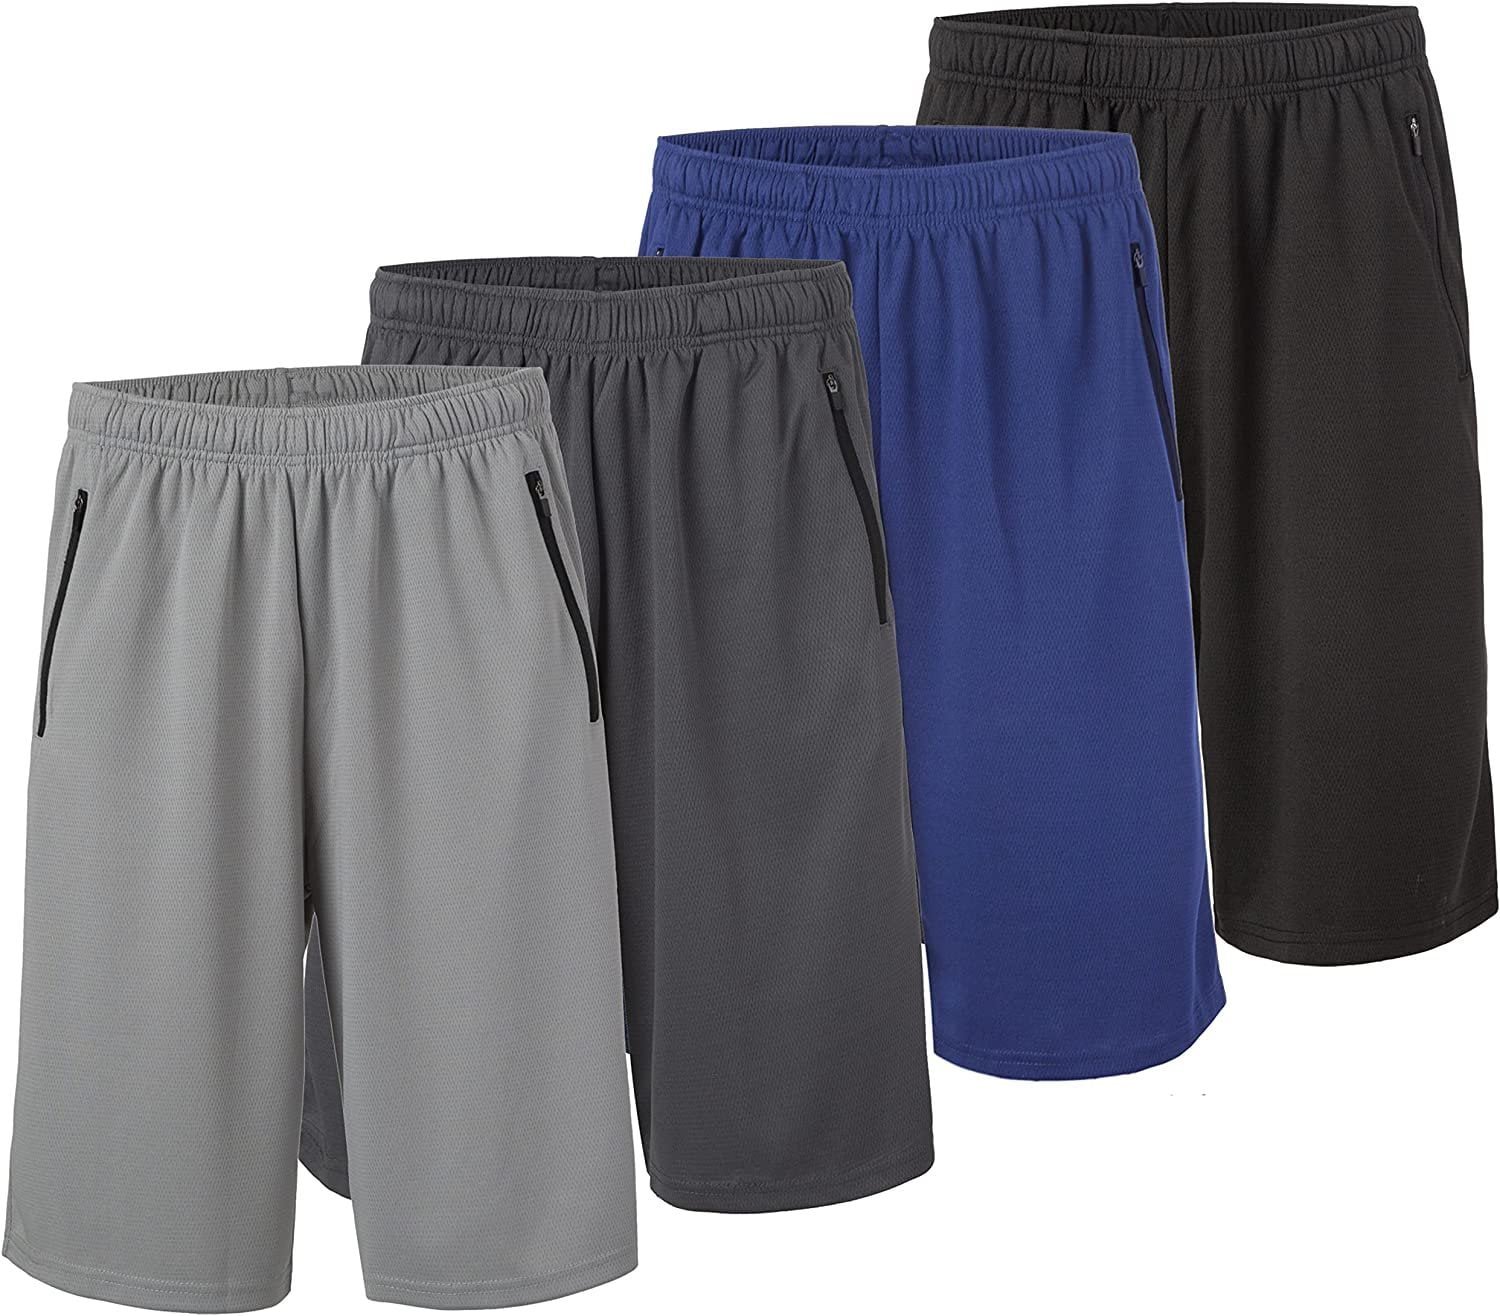 Athletic Shorts for Men - 4 Pack Men's Activewear Quick Dry Basketball ...